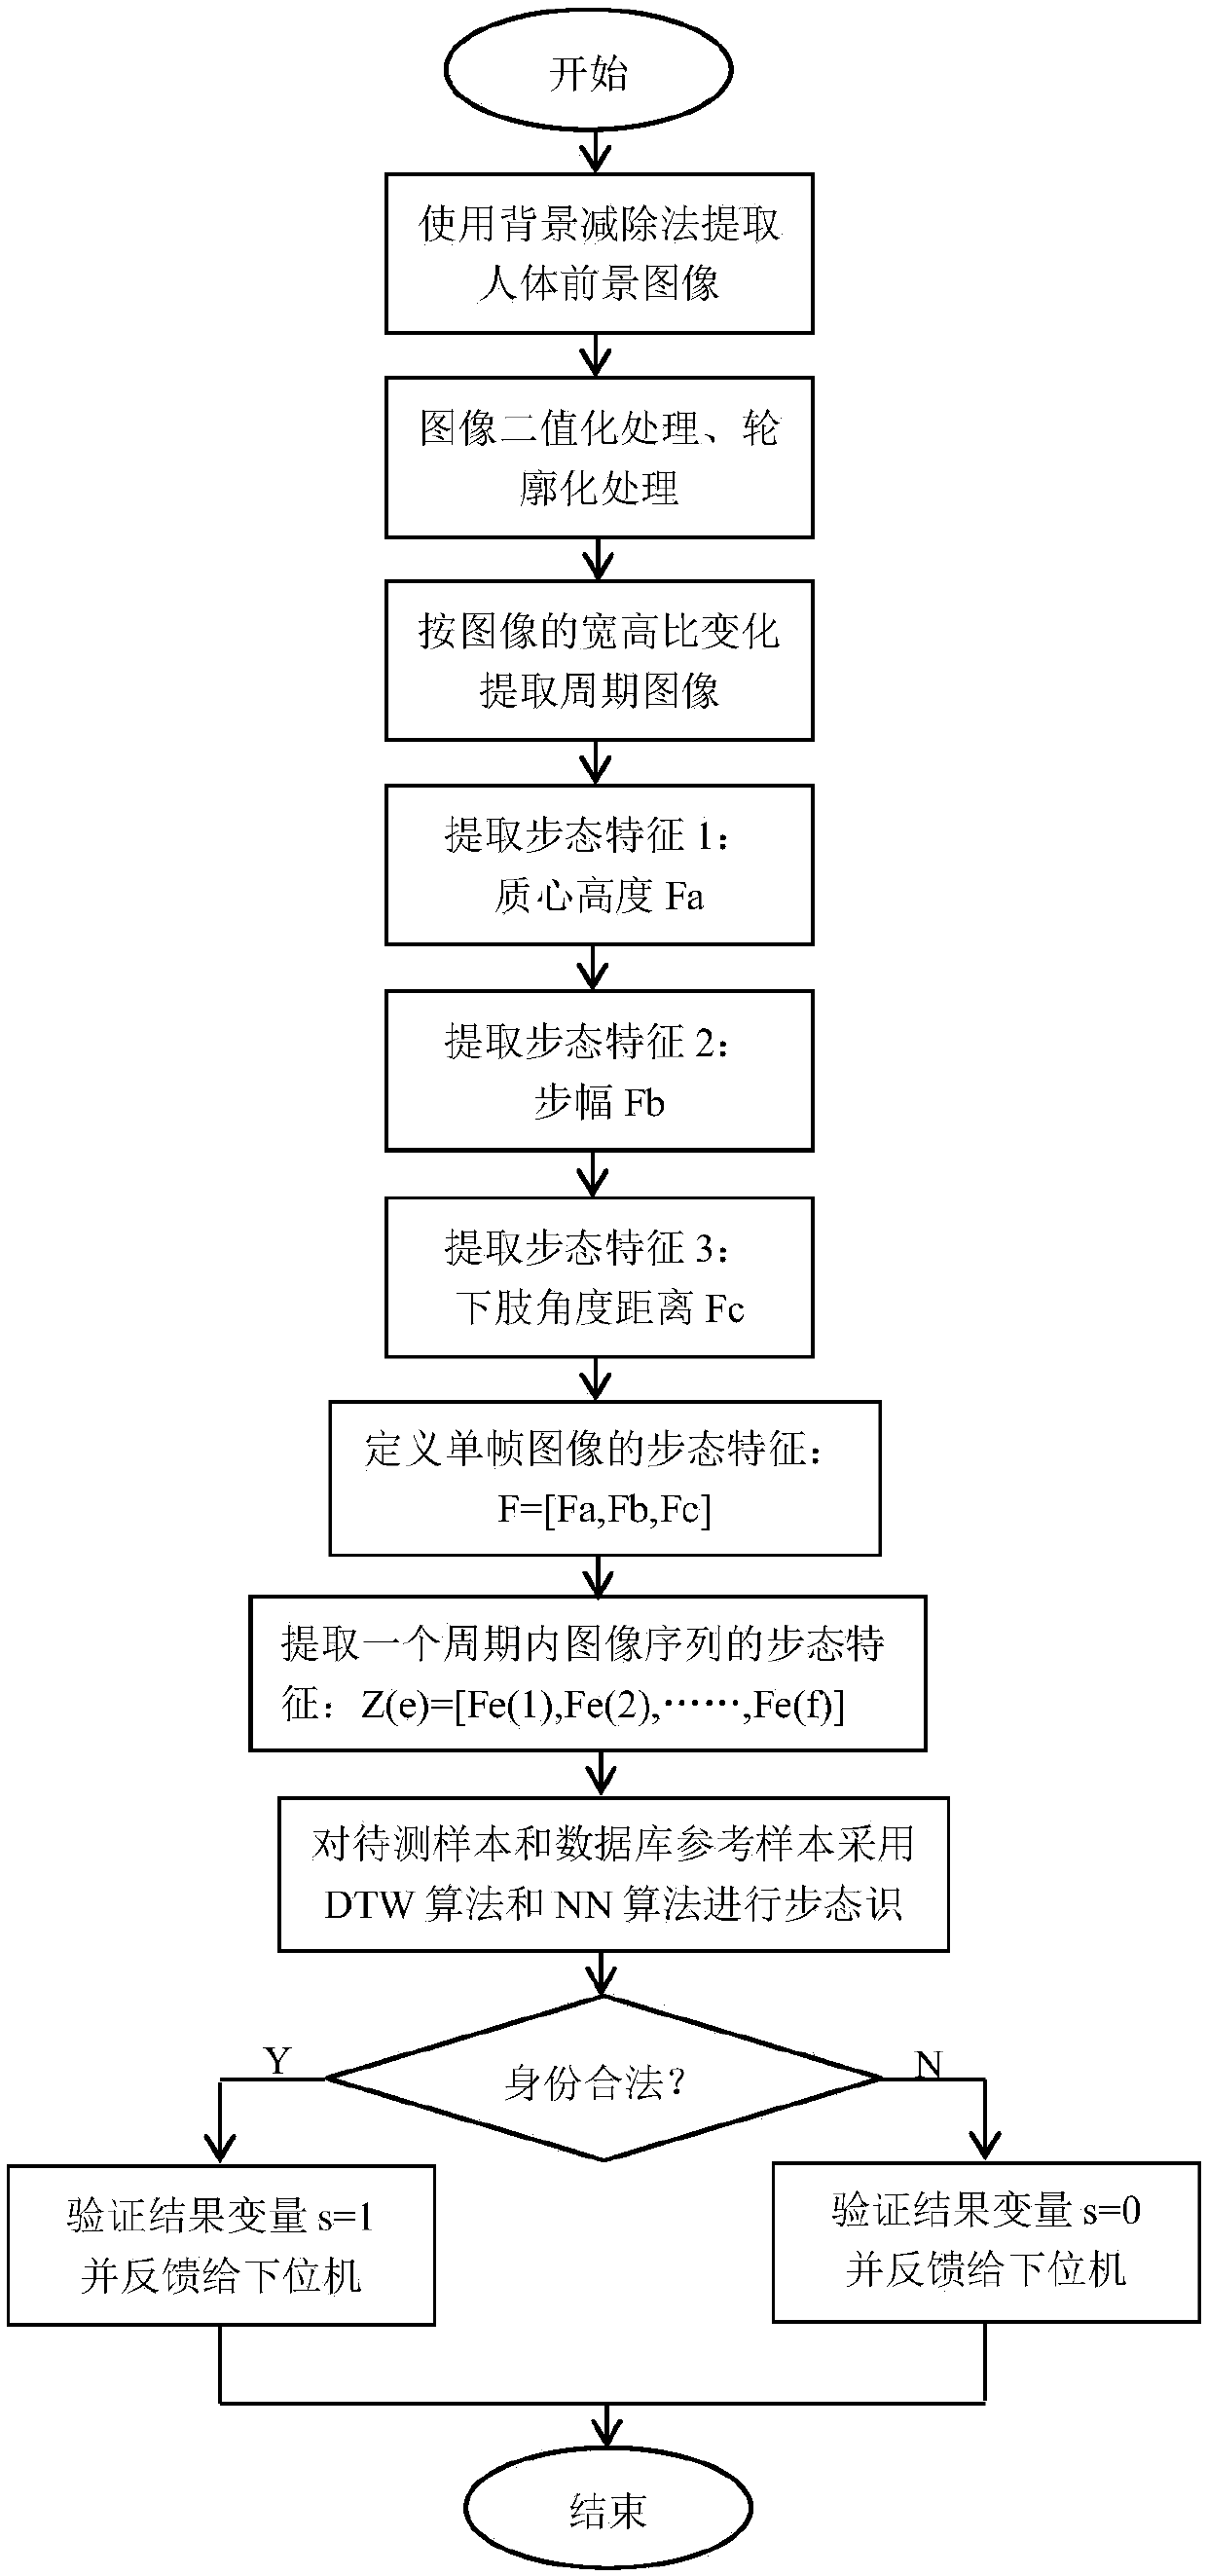 Video monitoring system and real-time gait recognition method